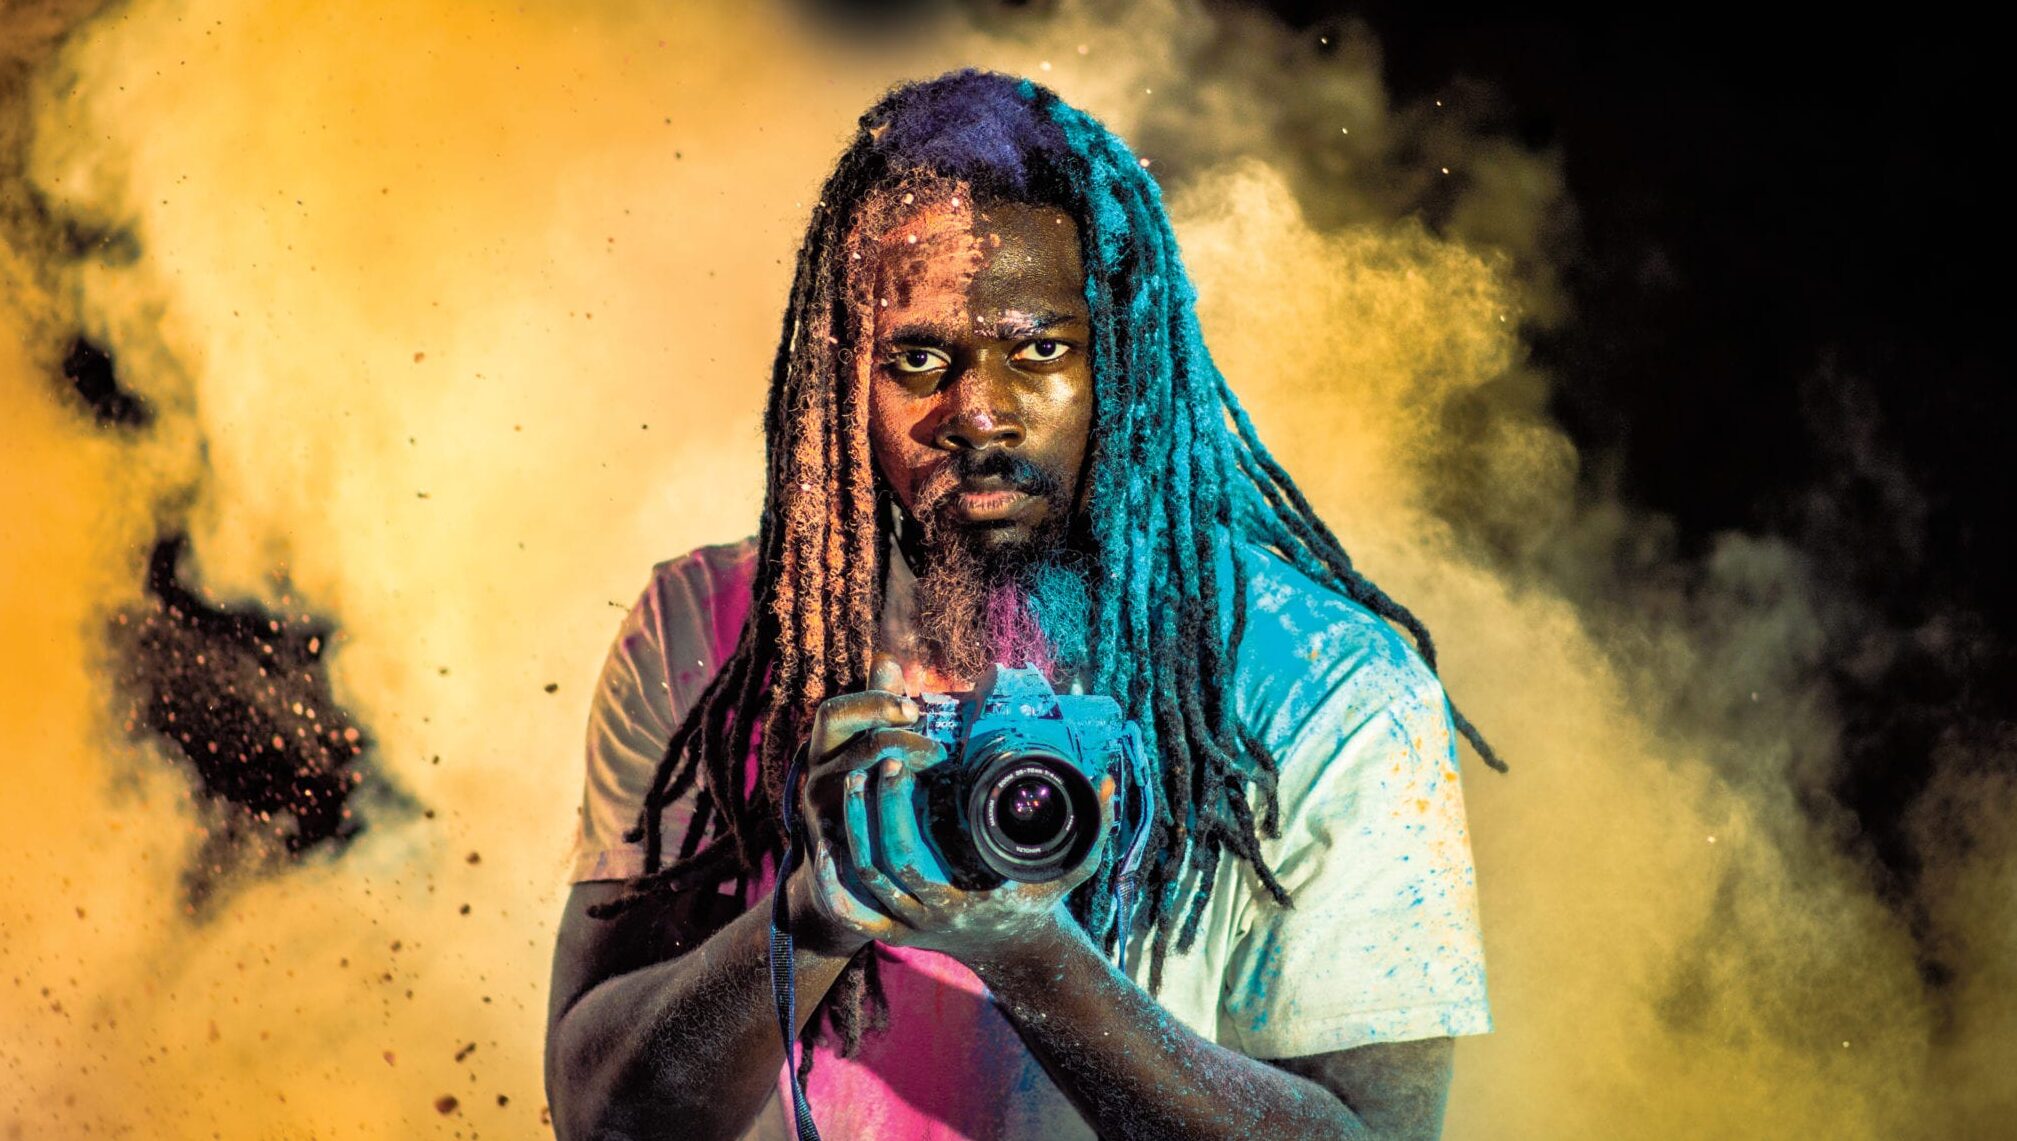 A photographer holds his camera in the midst of a cloud of colorful smoke or dust